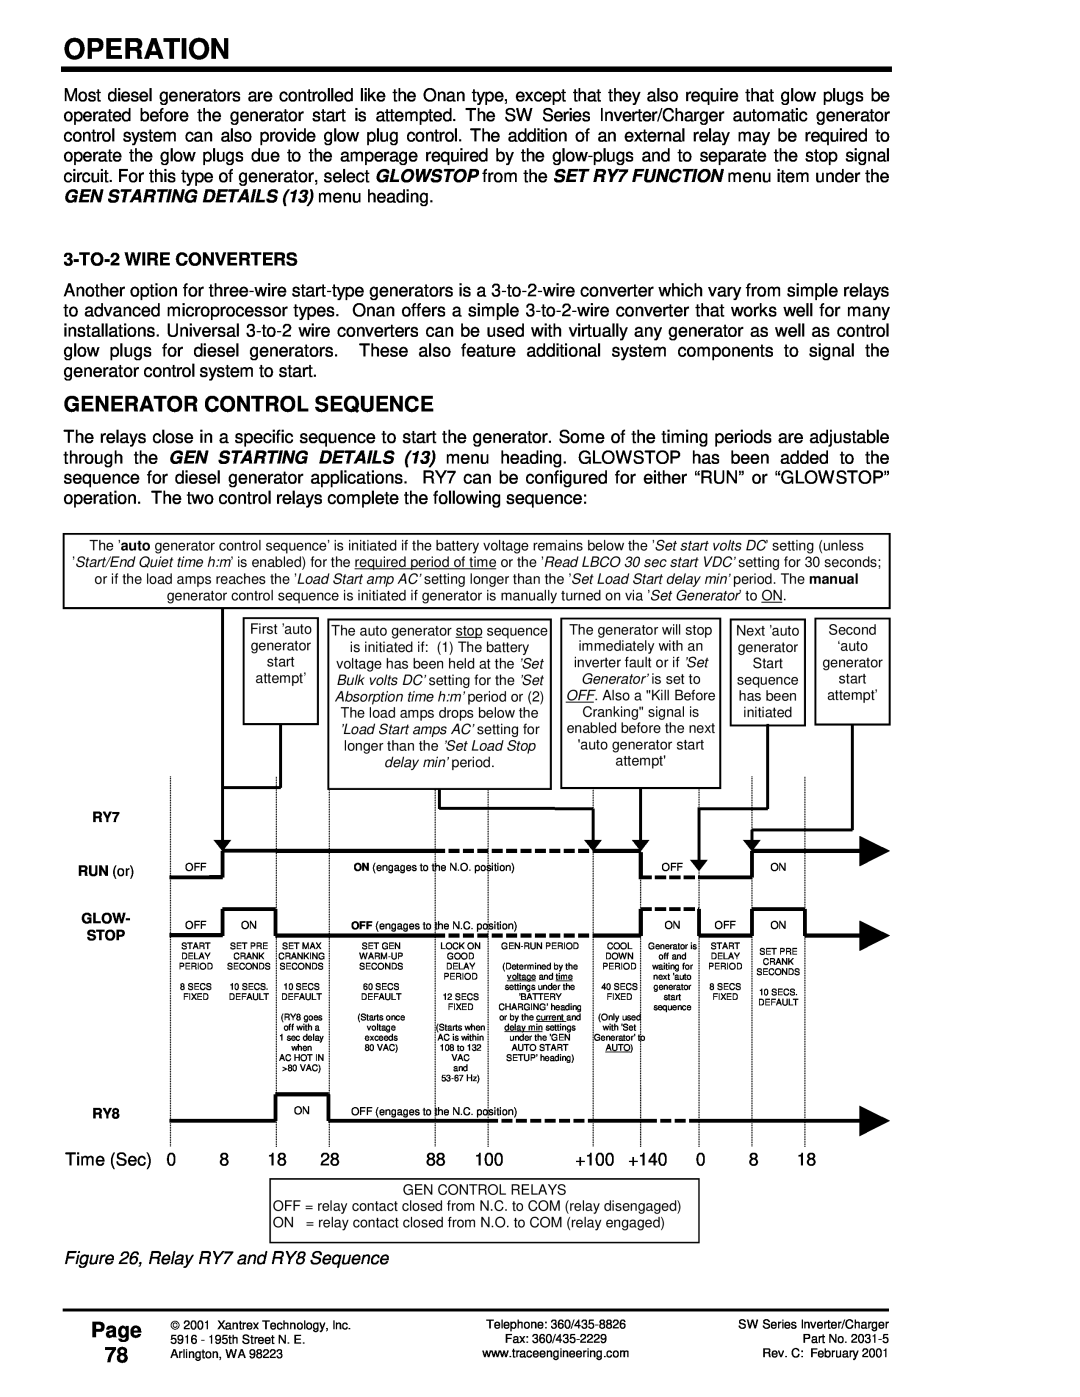 Xantrex Technology SW Series owner manual Generator Control Sequence, Page 78, 3-TO-2WIRE CONVERTERS, Operation 